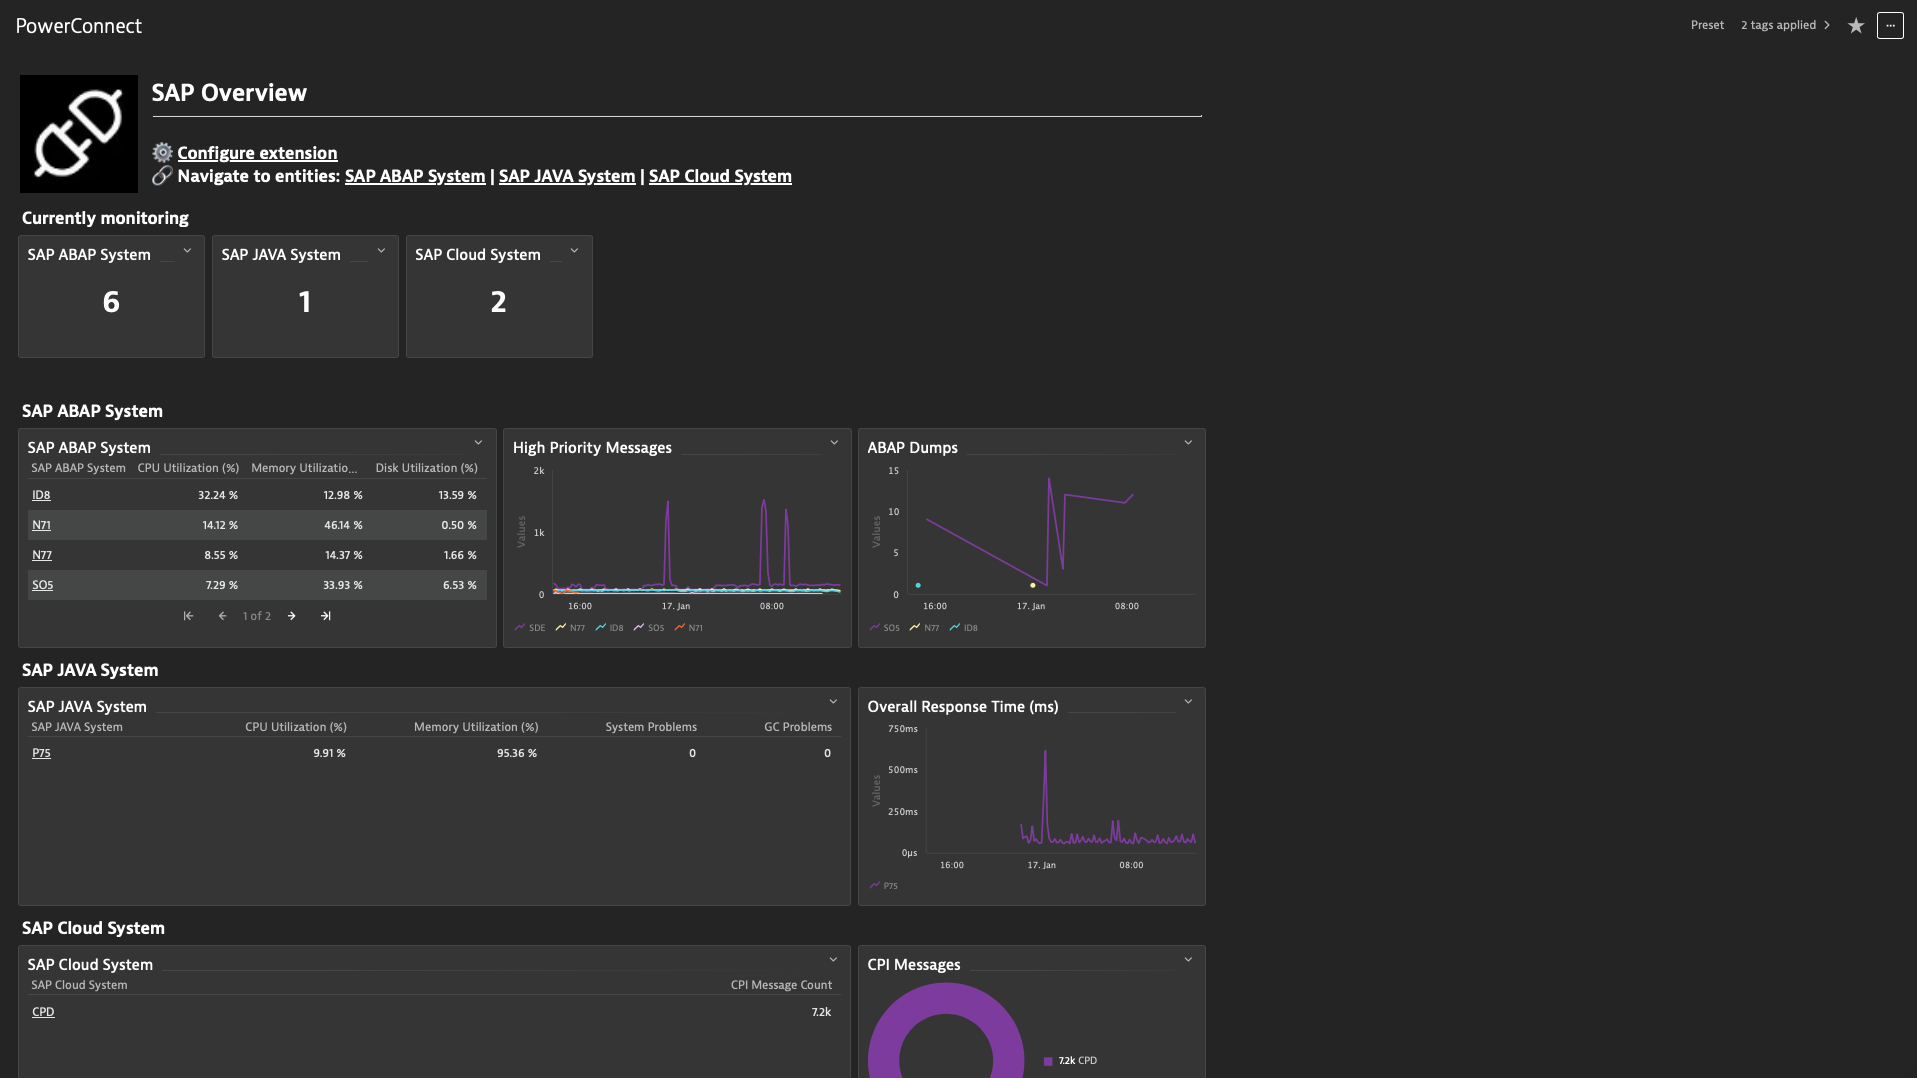  SAP KPIs reported by PowerConnect for SAP ABAP, Java, and cloud systems can be embedded into any Dynatrace dashboard.